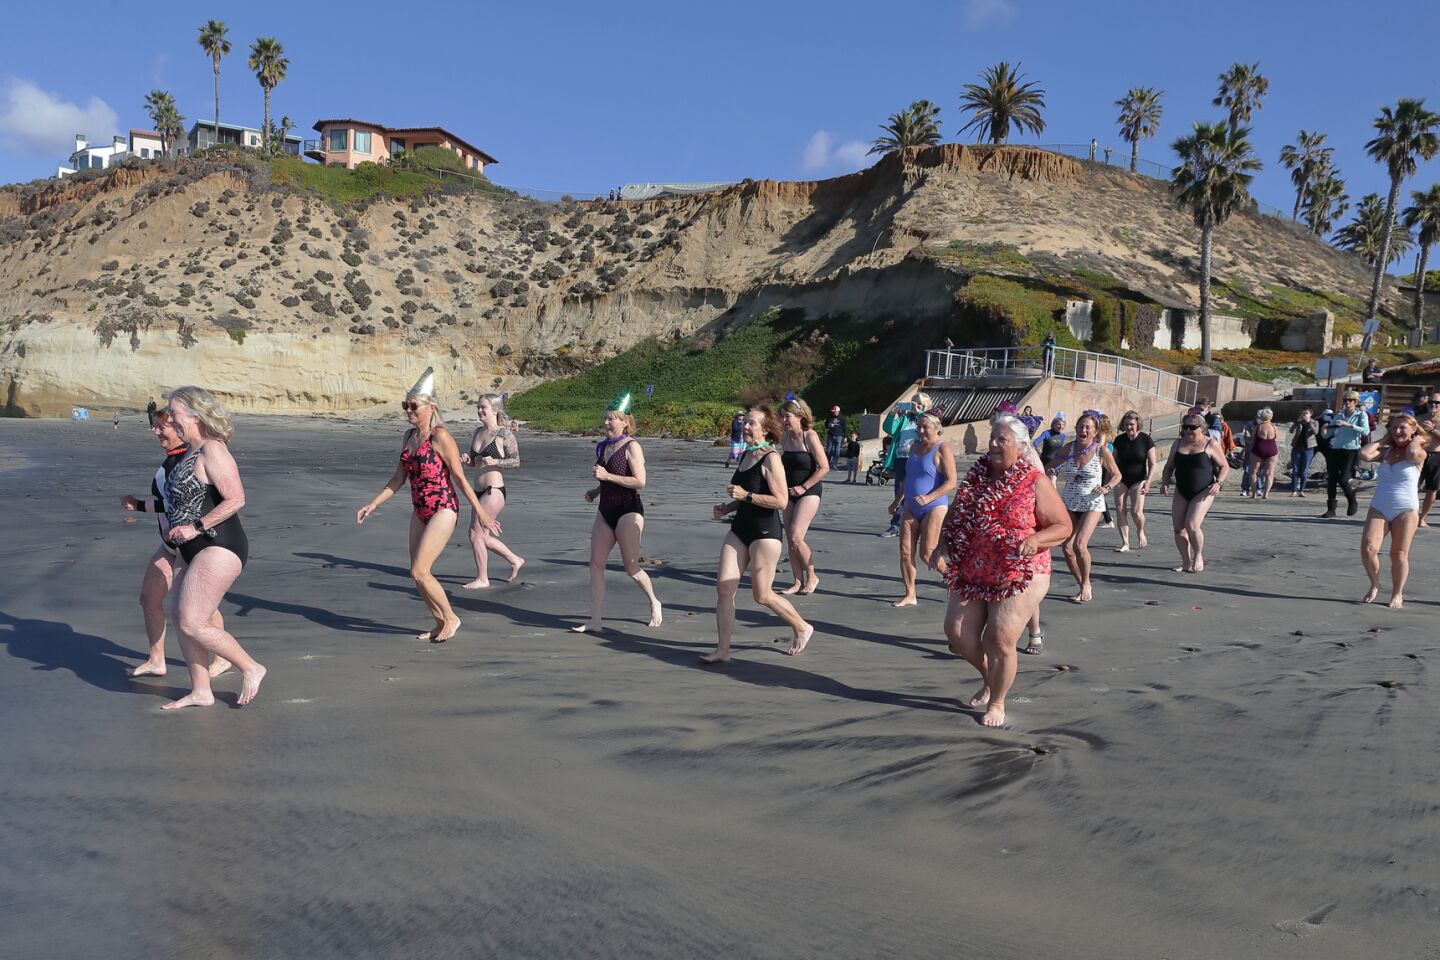 Members of the San Dieguito Boogie Babes plunged into the ocean on New Years Day 2022 at Fletcher Cove in Solana Beach